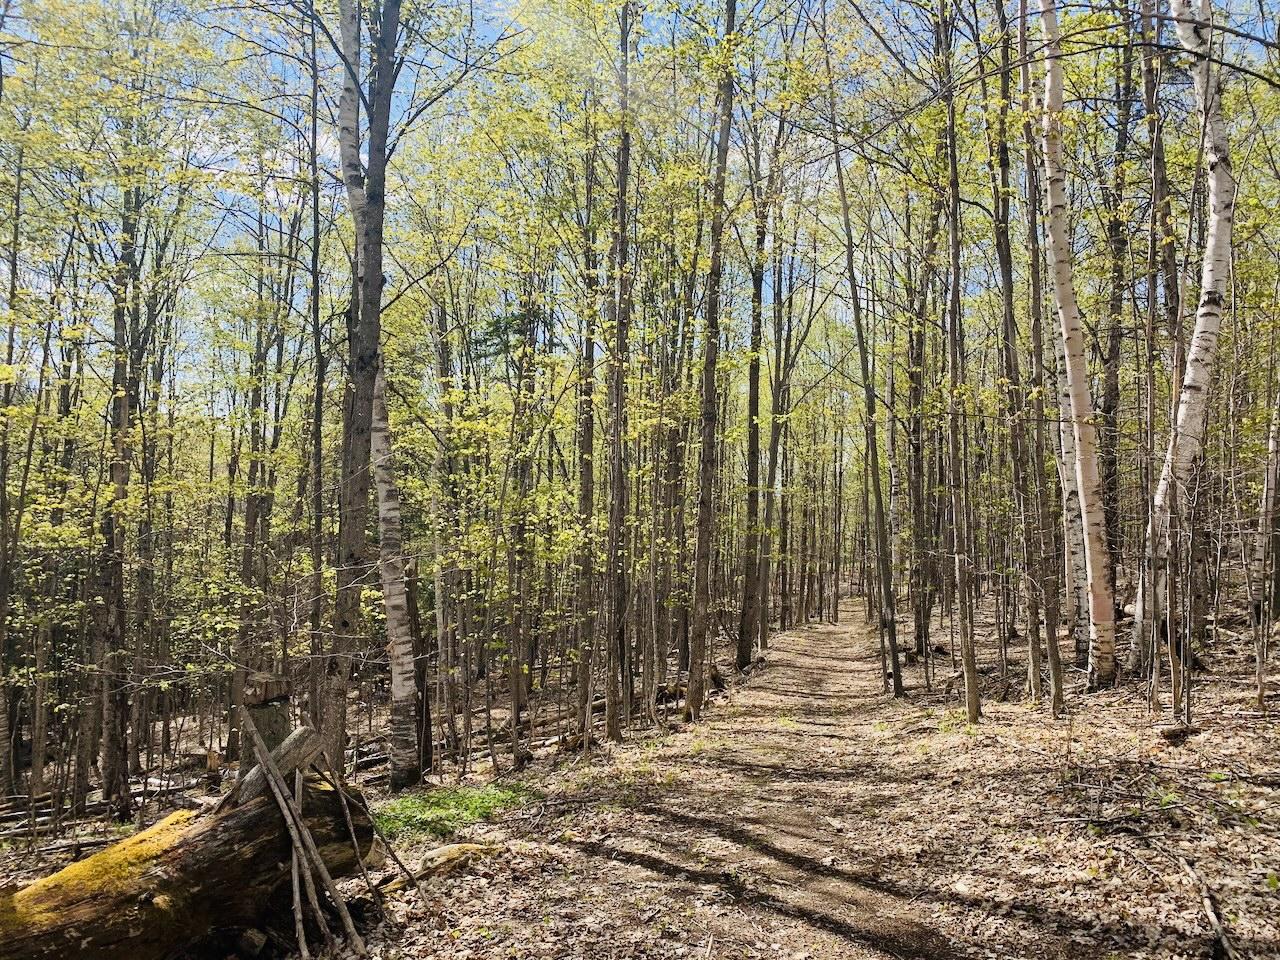 Spring at a Vermont forest sanctuary